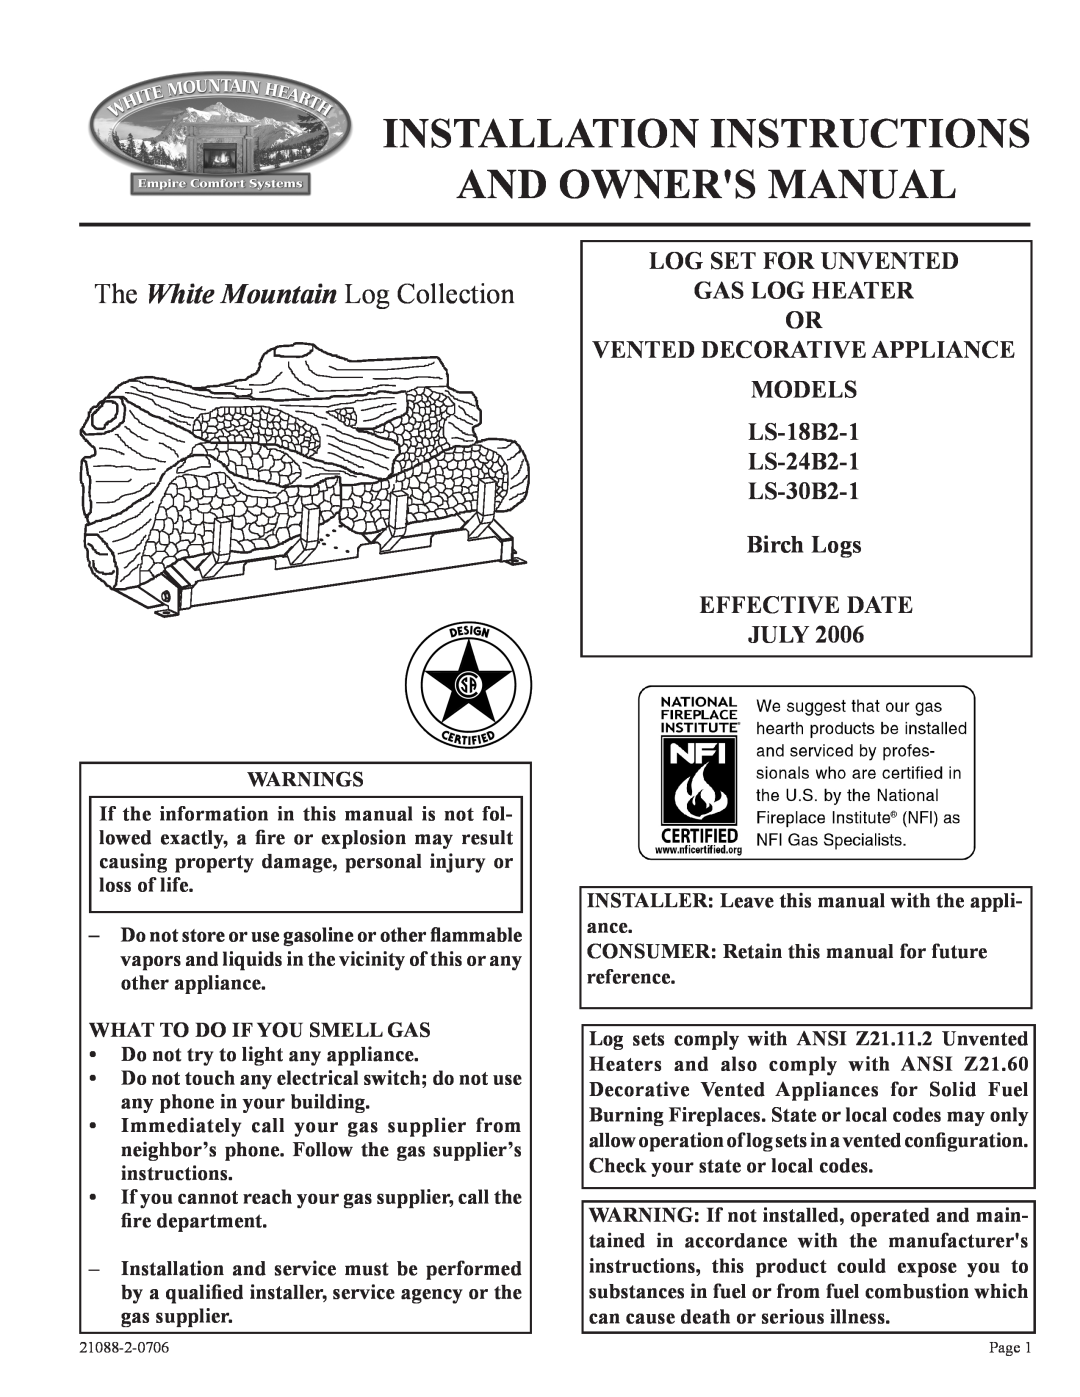 Empire Comfort Systems LS-24B2-1, LS-30B2-1, LS-18B2-1 installation instructions The White Mountain Log Collection, July 